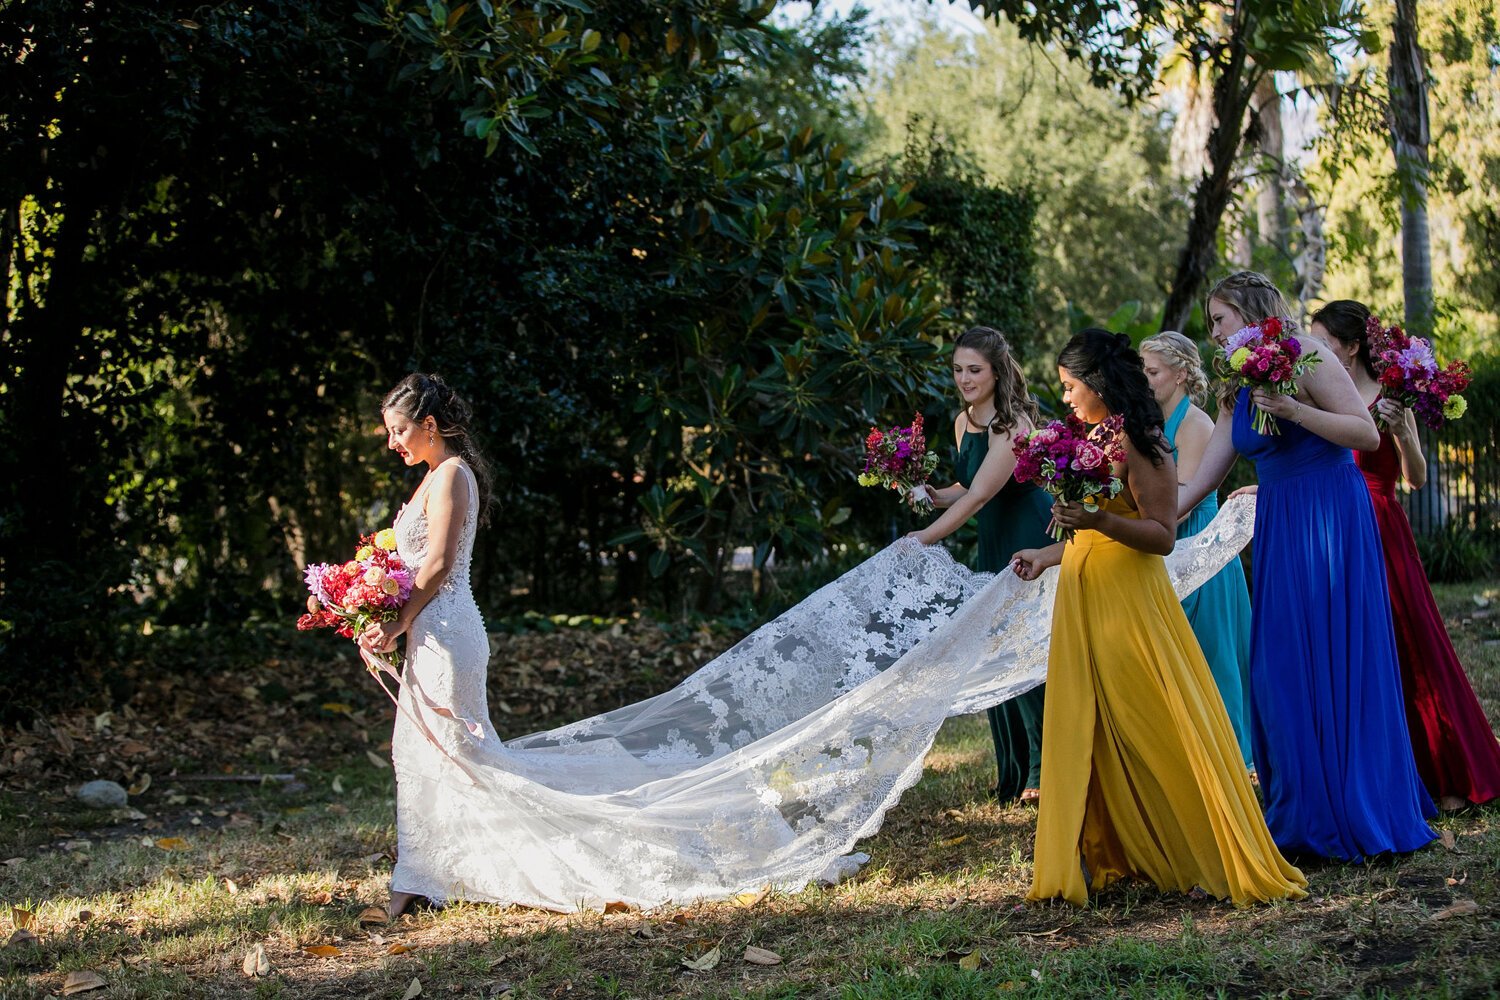 www.santabarbarawedding.com | Nightingale Photography | Rancho Dos Pueblos | Wild Hearts Events | TEAM Hair &amp; Makeup | Knot Just Flowers | Bridesmaids Carrying Bride’s Dress Train